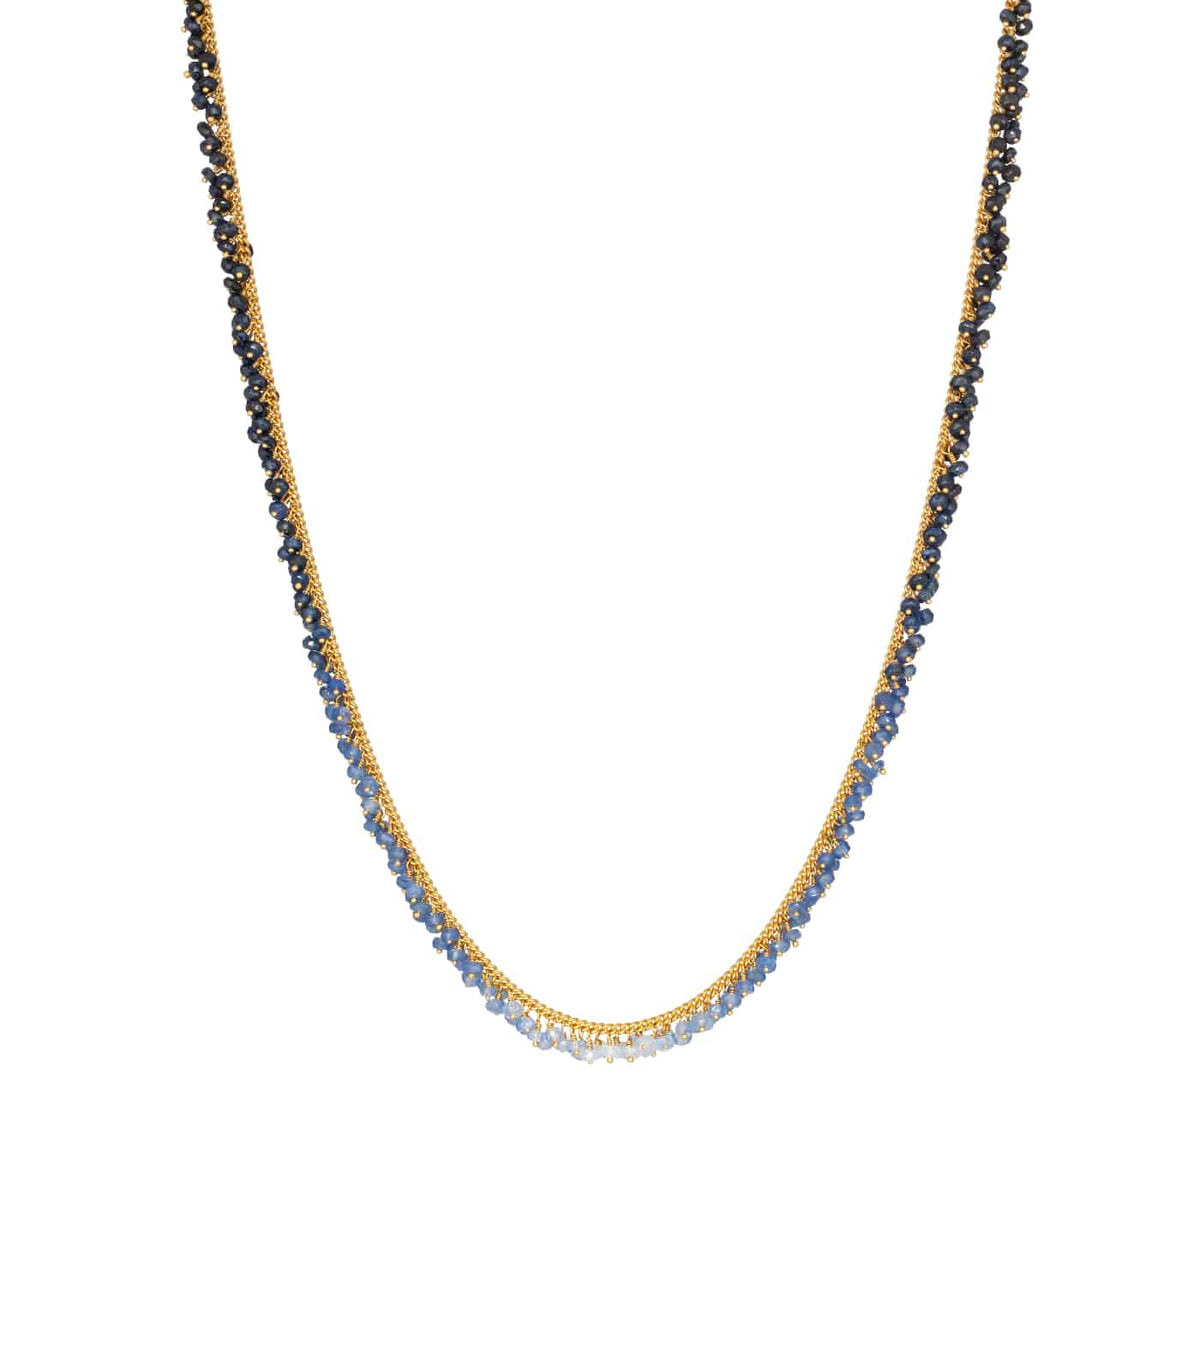 Kate Wood ‘Full Row’ Ombré Sapphire Necklace